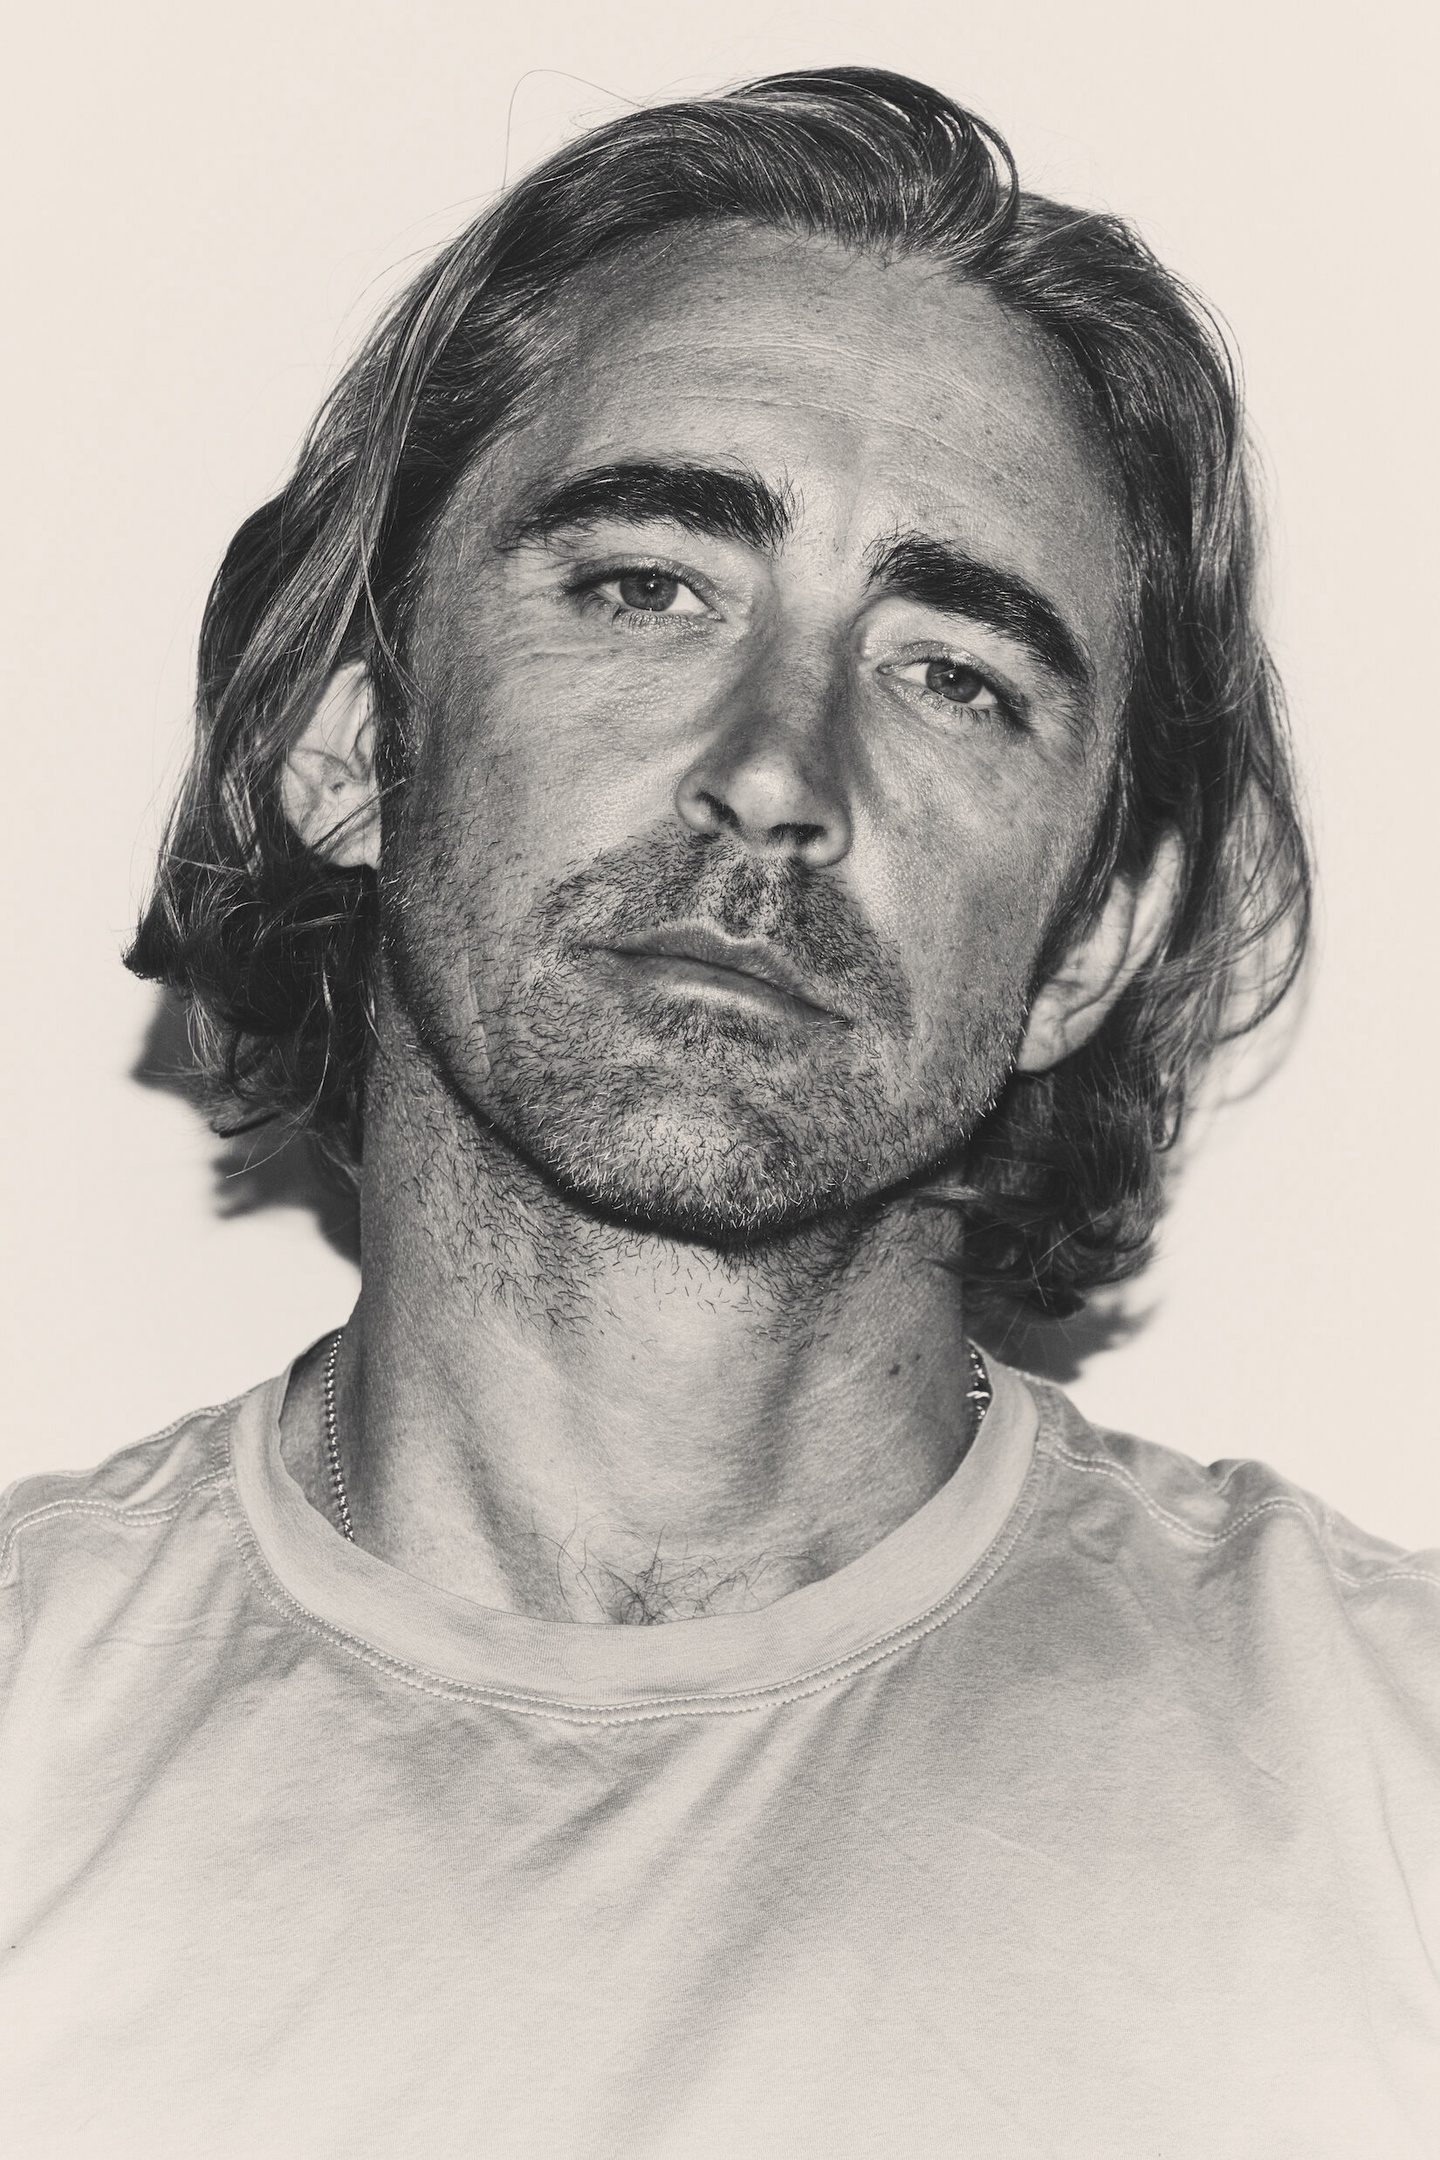 Lee Pace photo #1004111